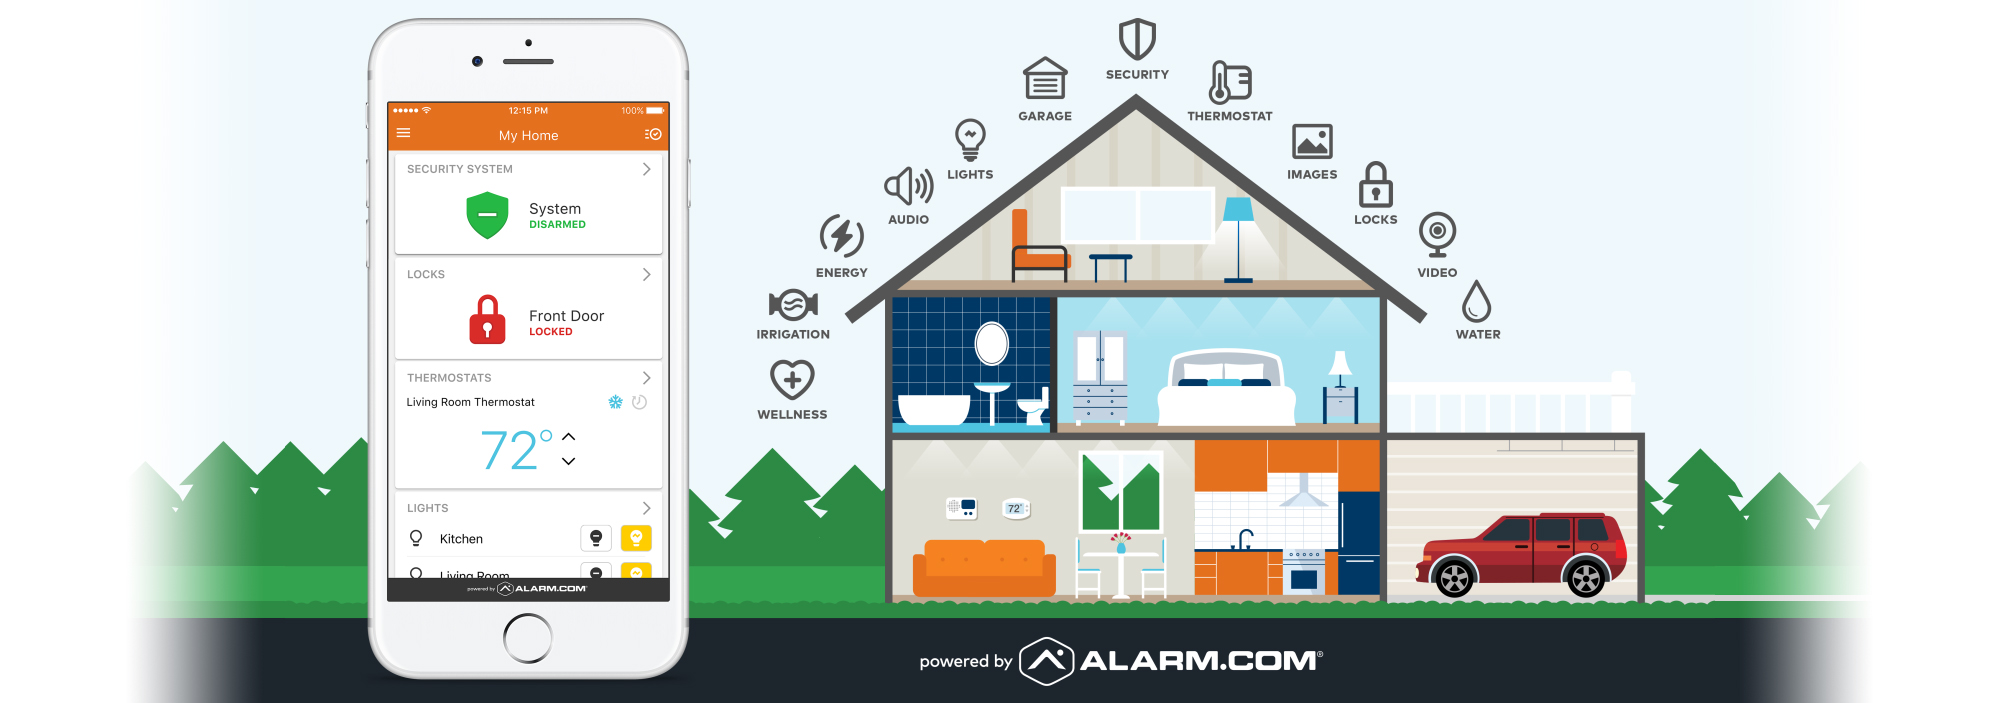 an image showing how the alarm.com app can help you secure your home